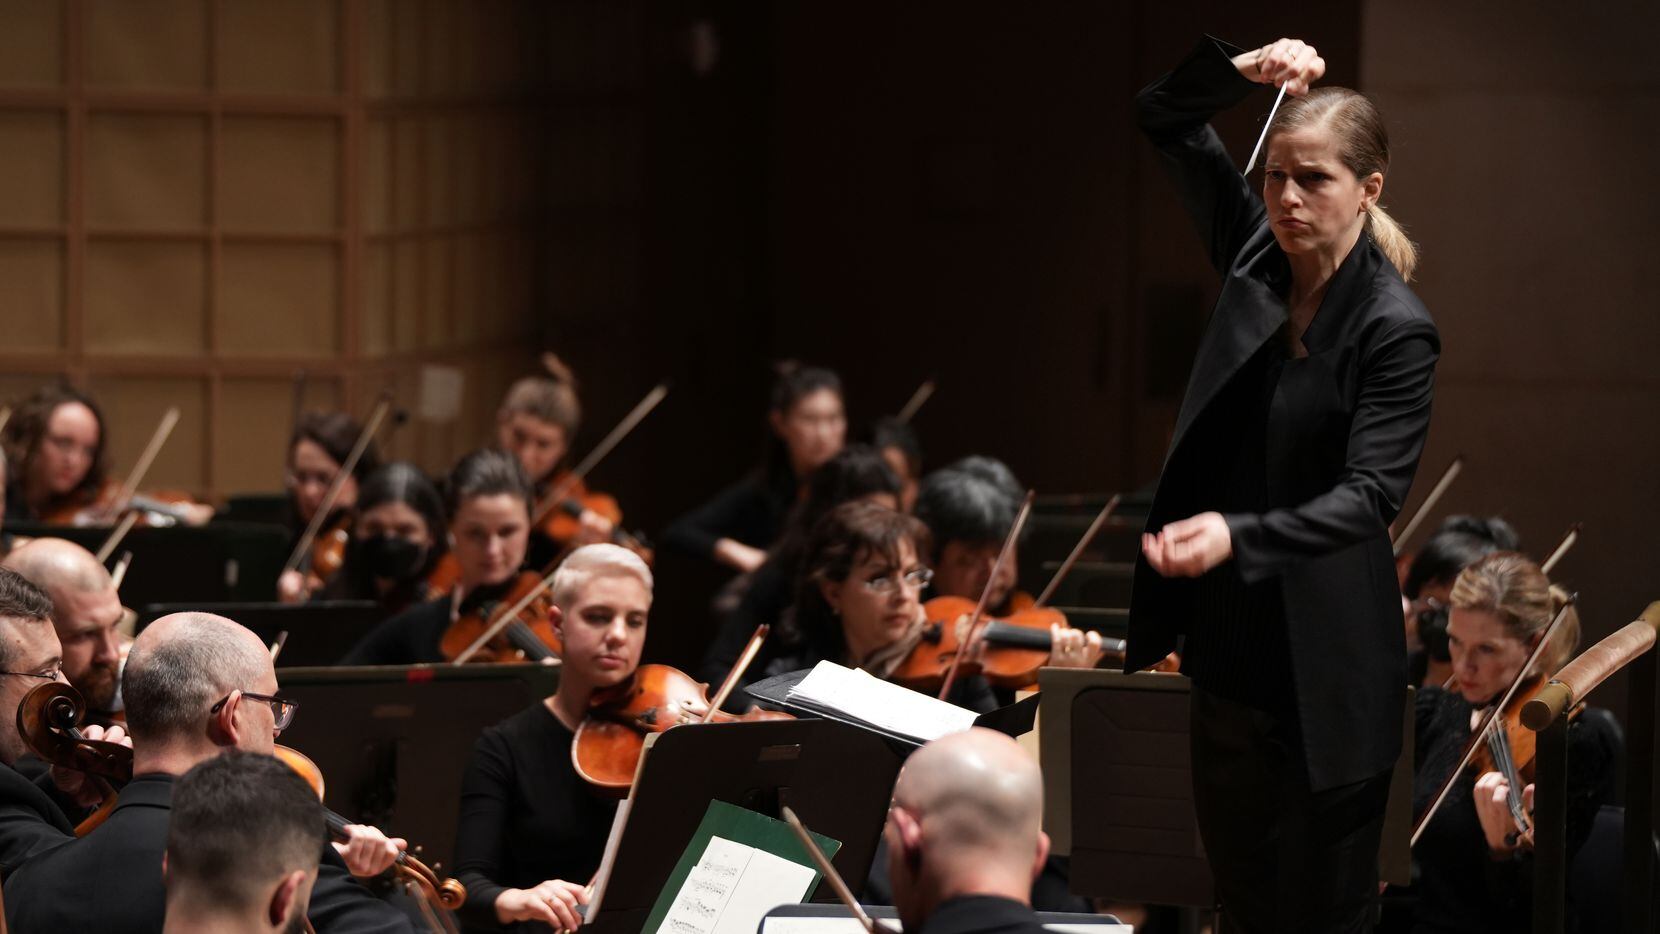 Karina Canellakis conducts the Dallas Symphony Orchestra at the Meyerson Symphony Center in...